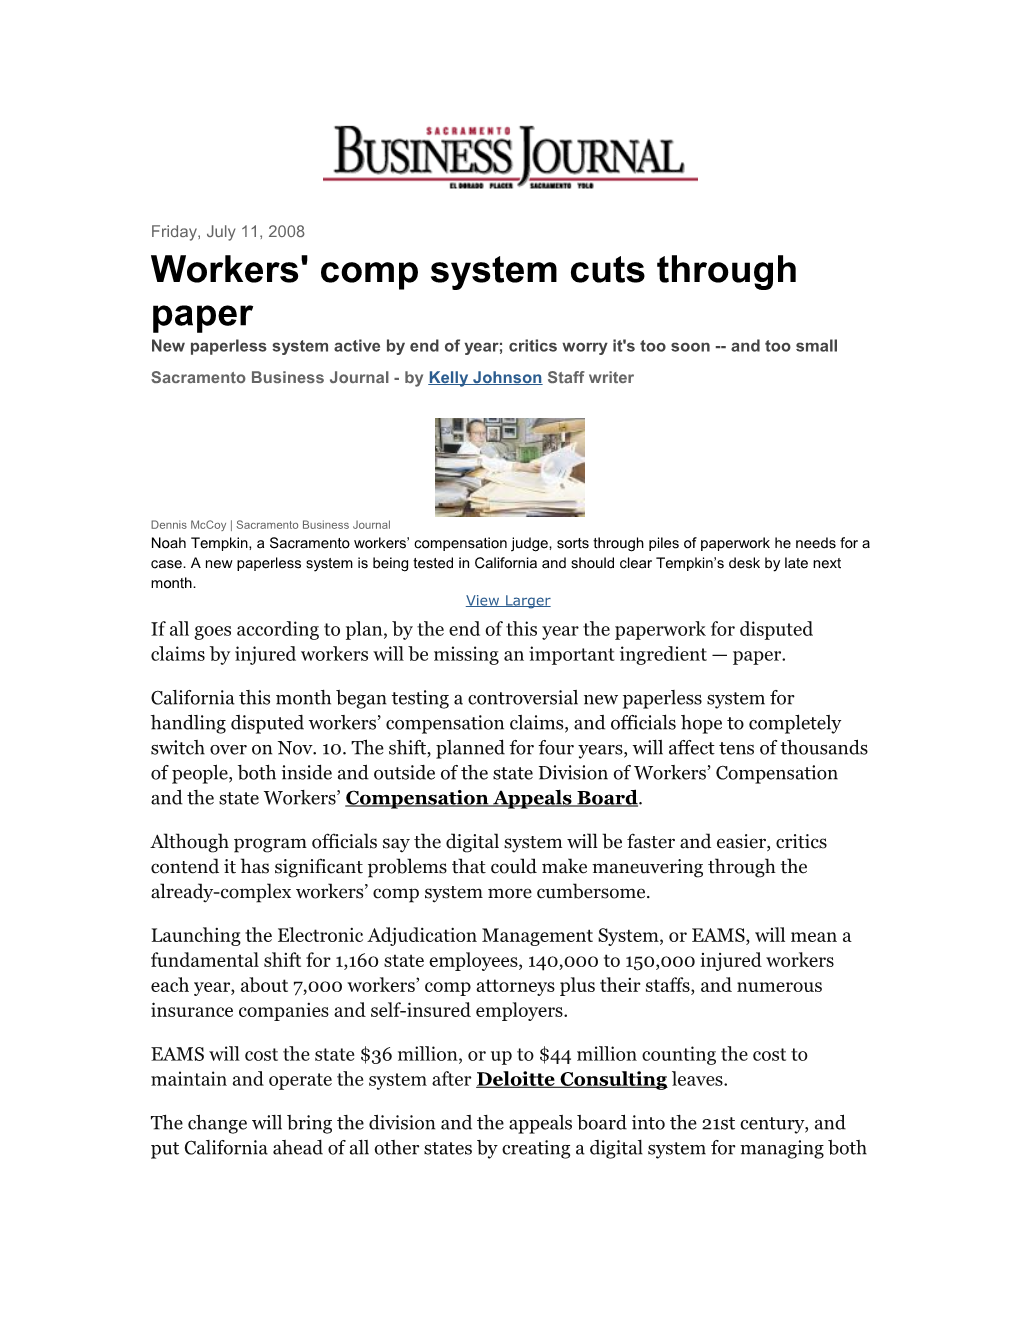 Workers' Comp System Cuts Through Paper